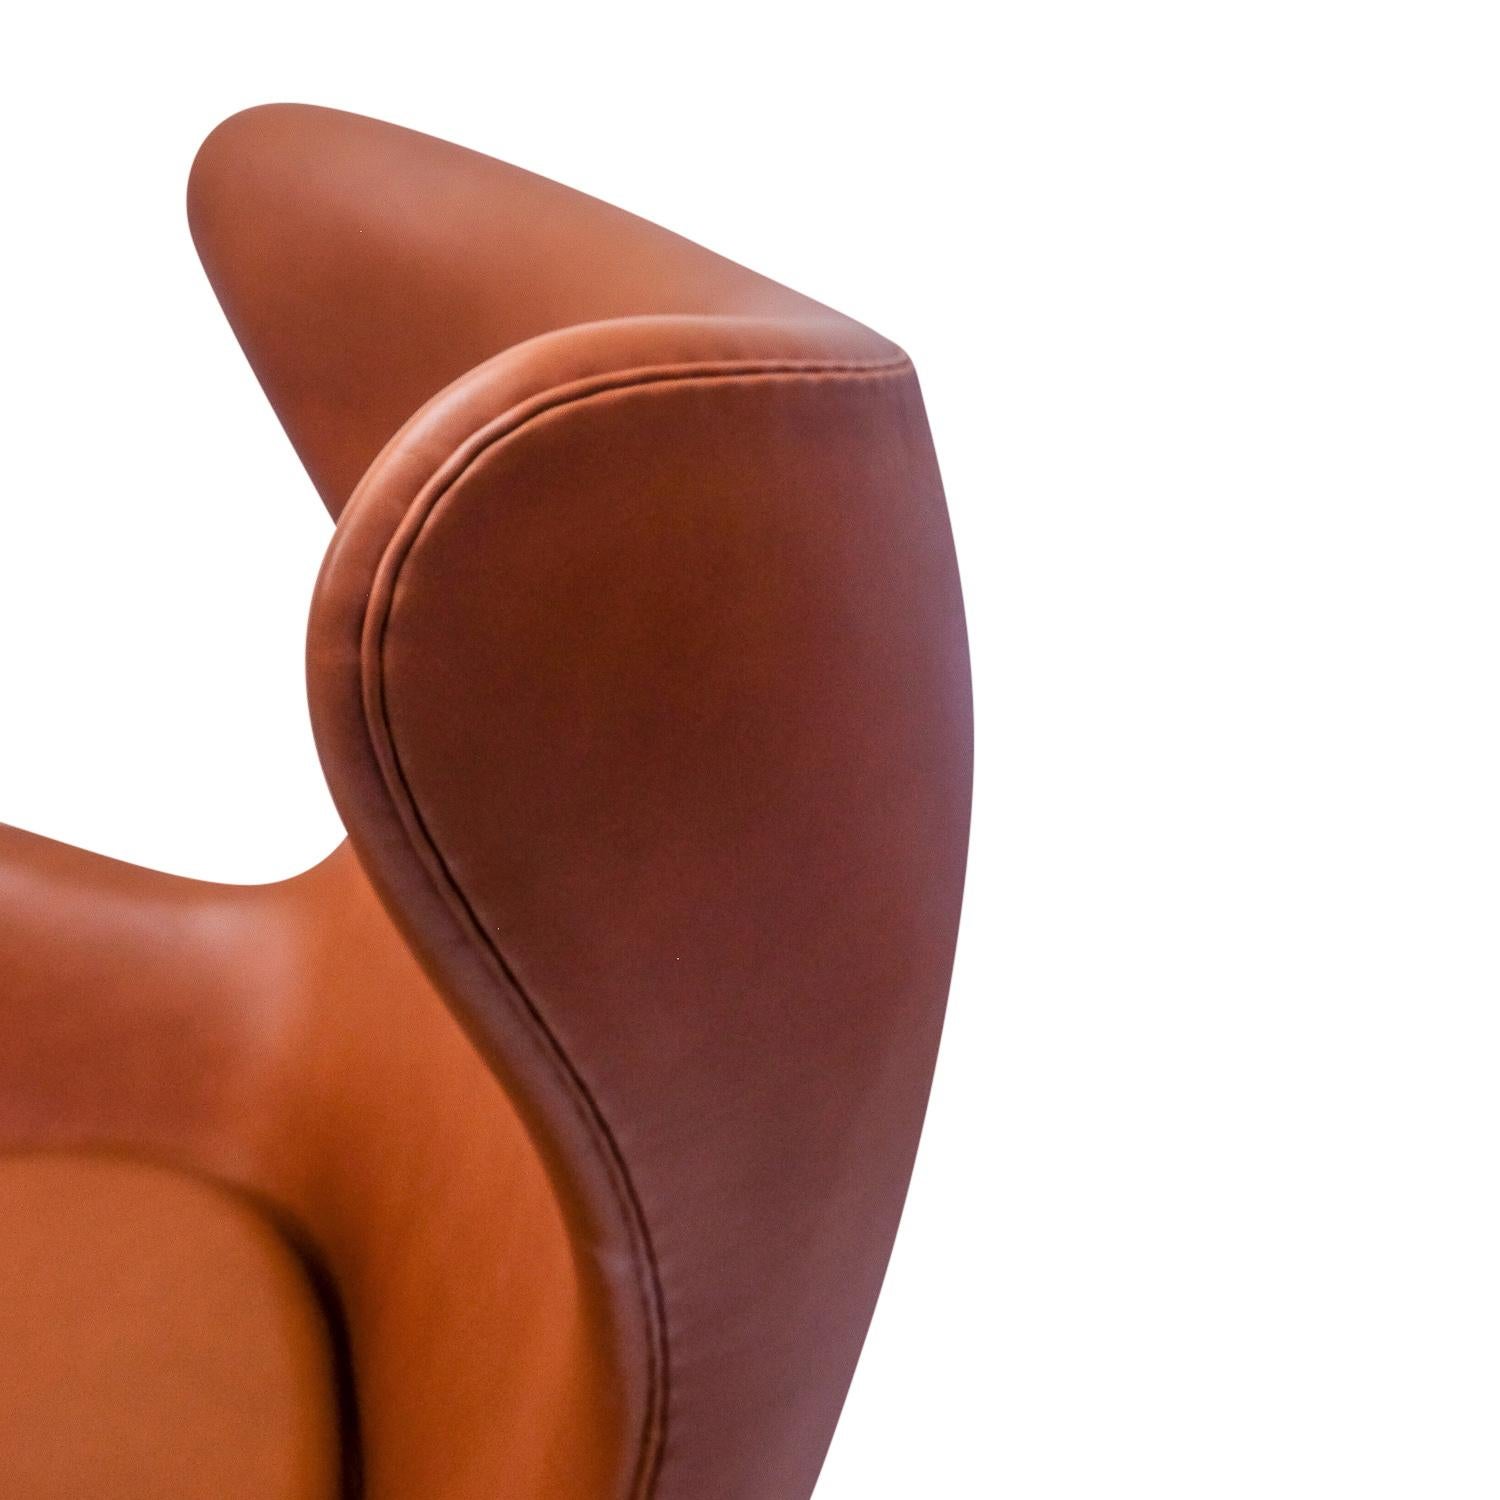 It took some time for Arne Jacobsen and Fritz Hansen to develop the Swan Chair; first editions were based on a wooden shell that was bent into shape. The leather upholstery is still done by hand, a painstaking process ensuring the leather to be